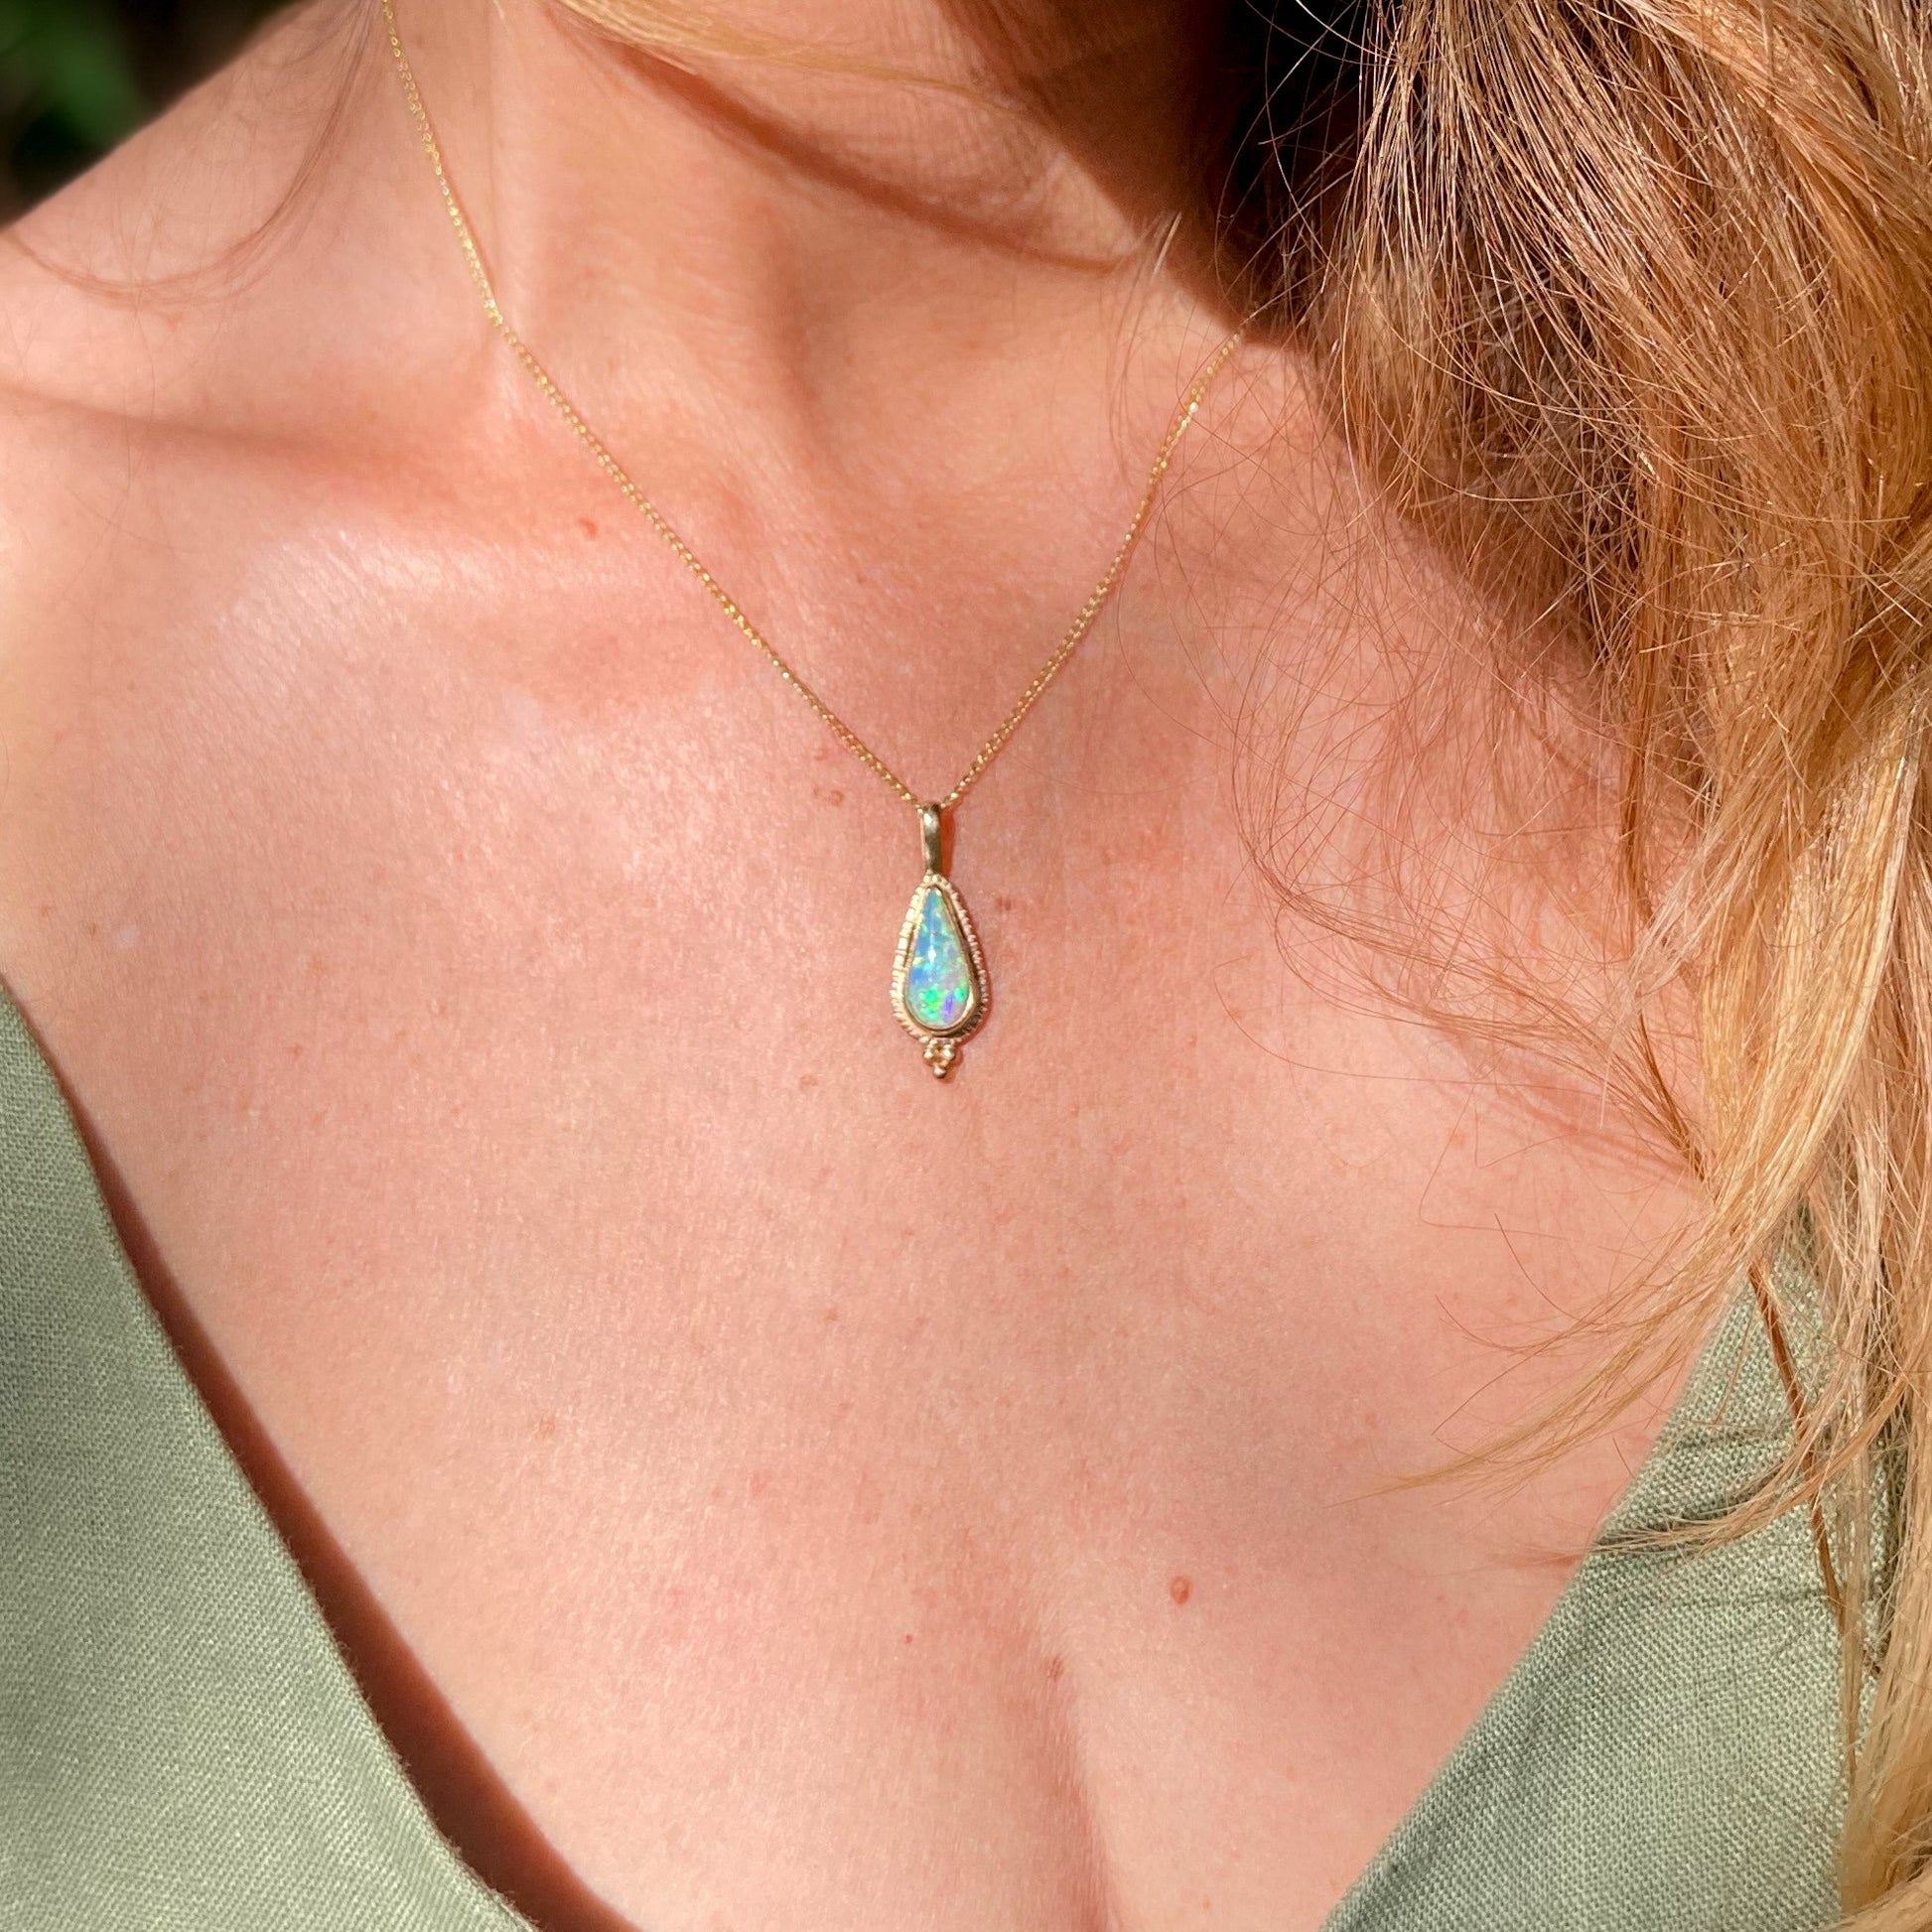 Opal Sunburst Necklace | Gold Plated Chain Pendant | Light Years Jewelry